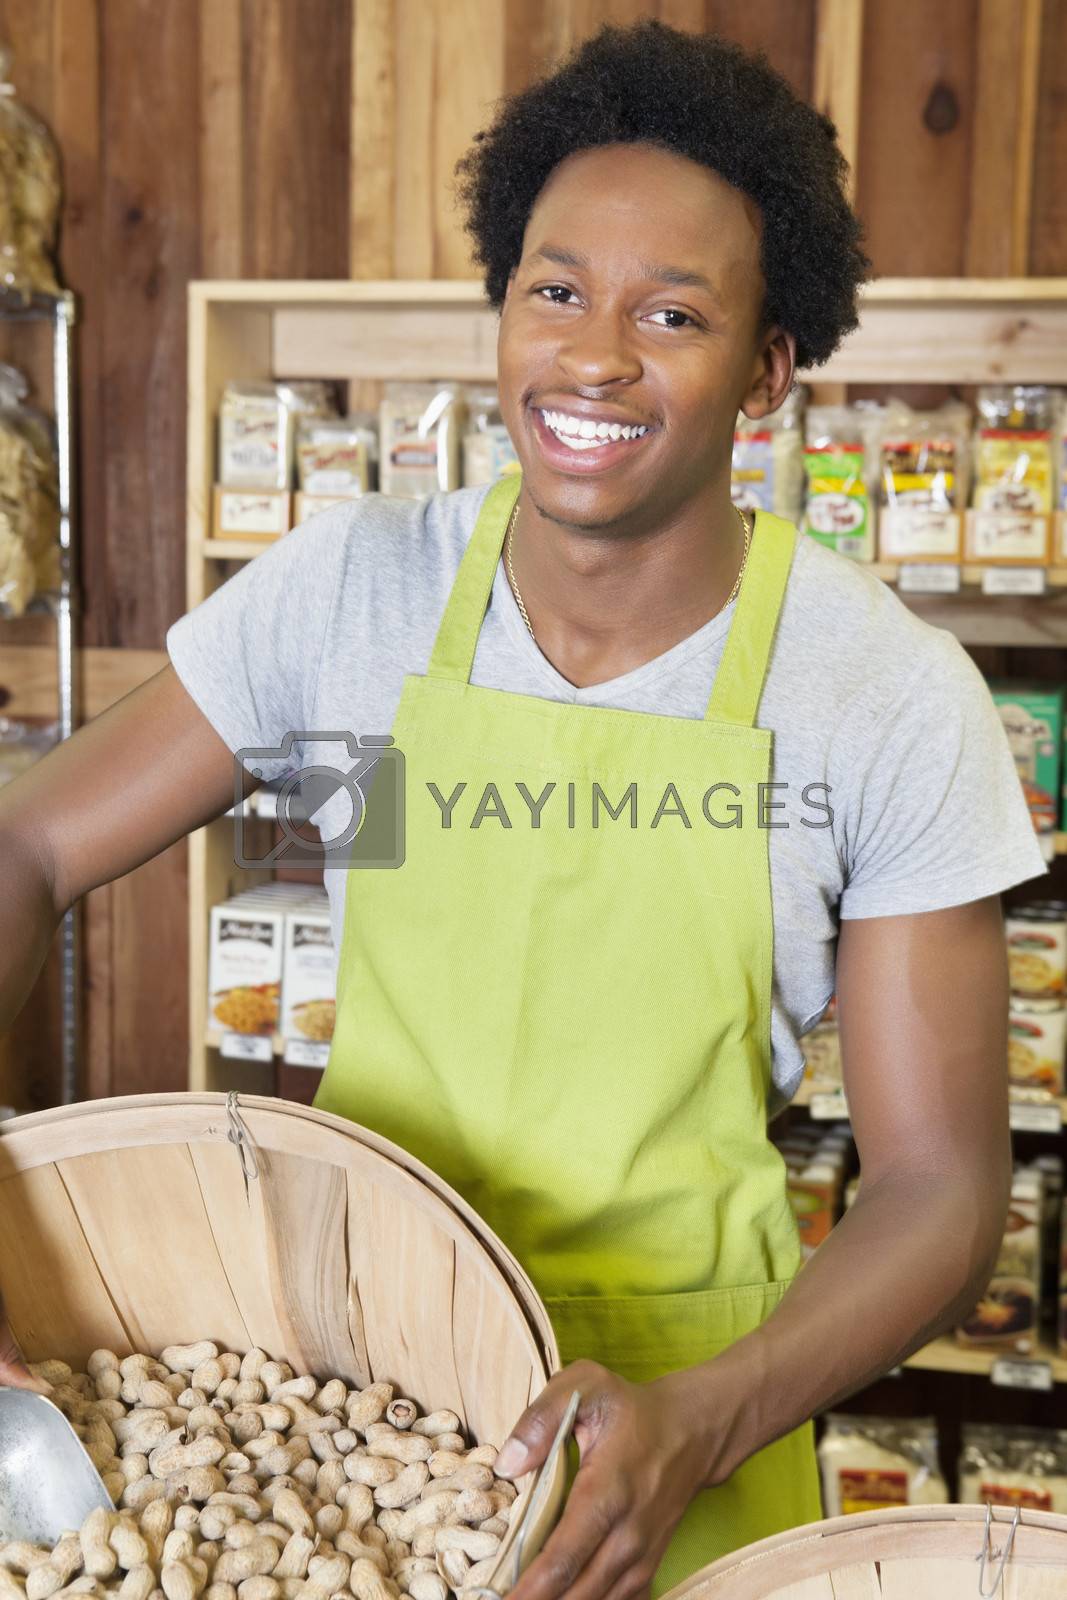 Royalty free image of Male African American store clerk holding basket of peanuts by moodboard